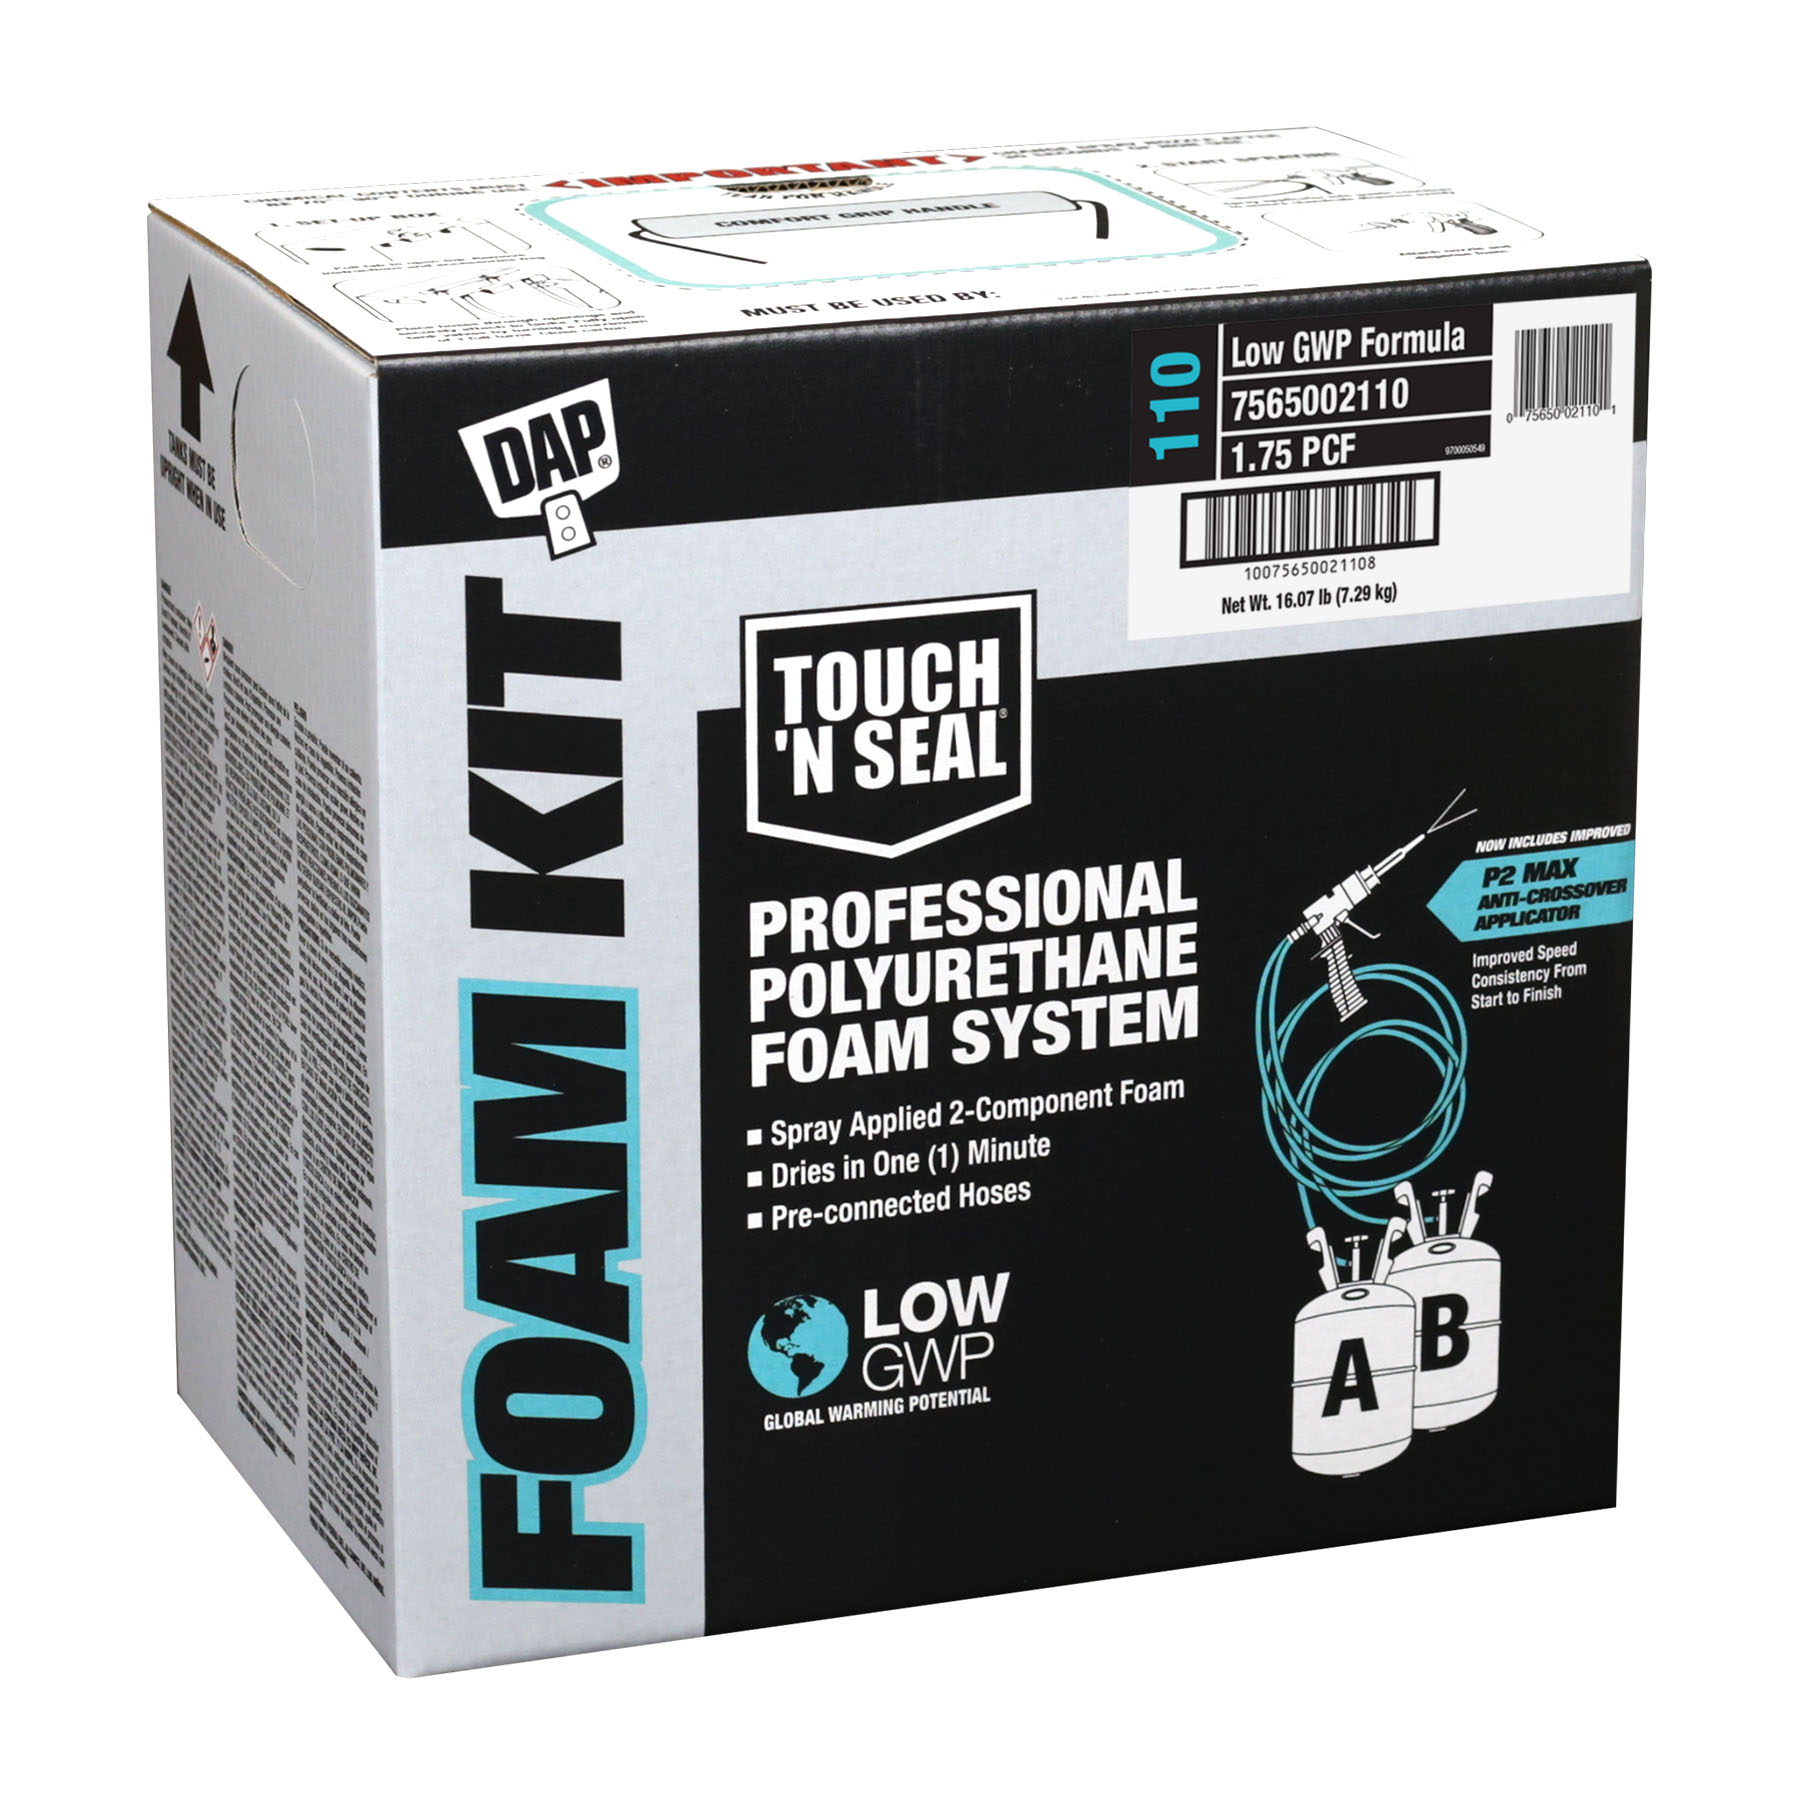 110 BF Touch N' Seal® Low GWP Foam Kit 1.75 PCF FR ICC